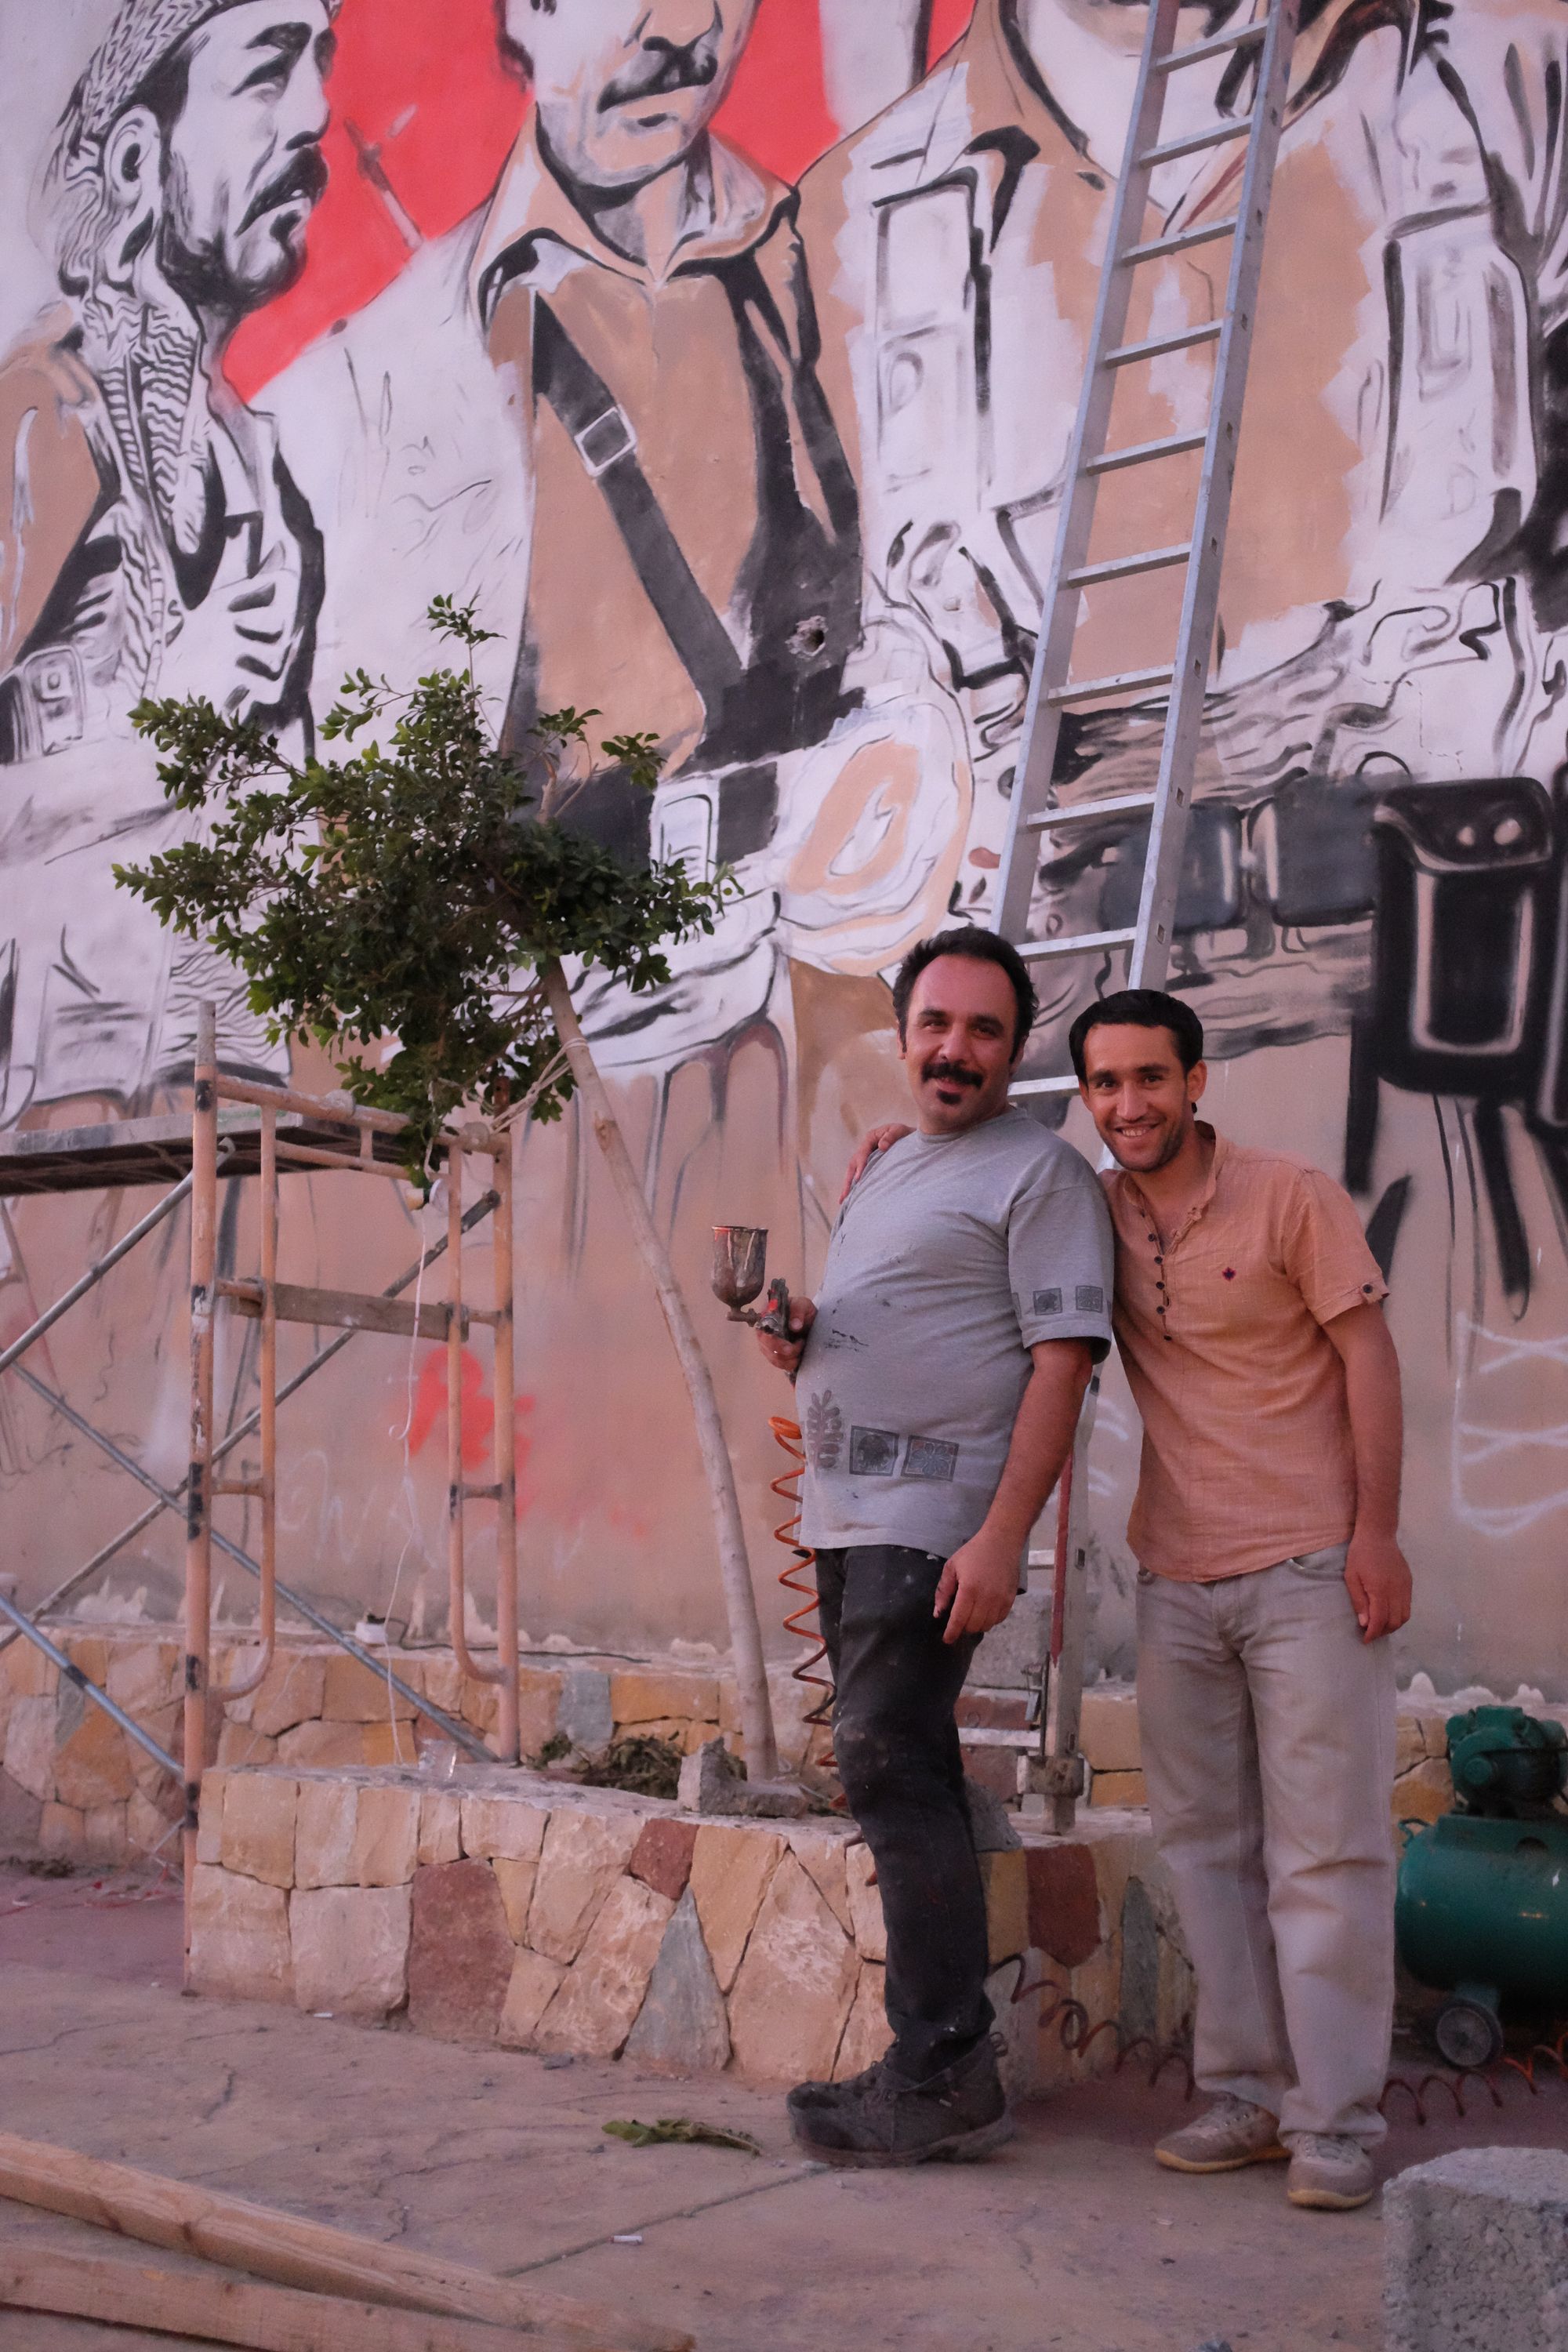 Two men with spray paint guns smile into the camera in front of a large mural which depicts peshmerga, Kurdish warriors.